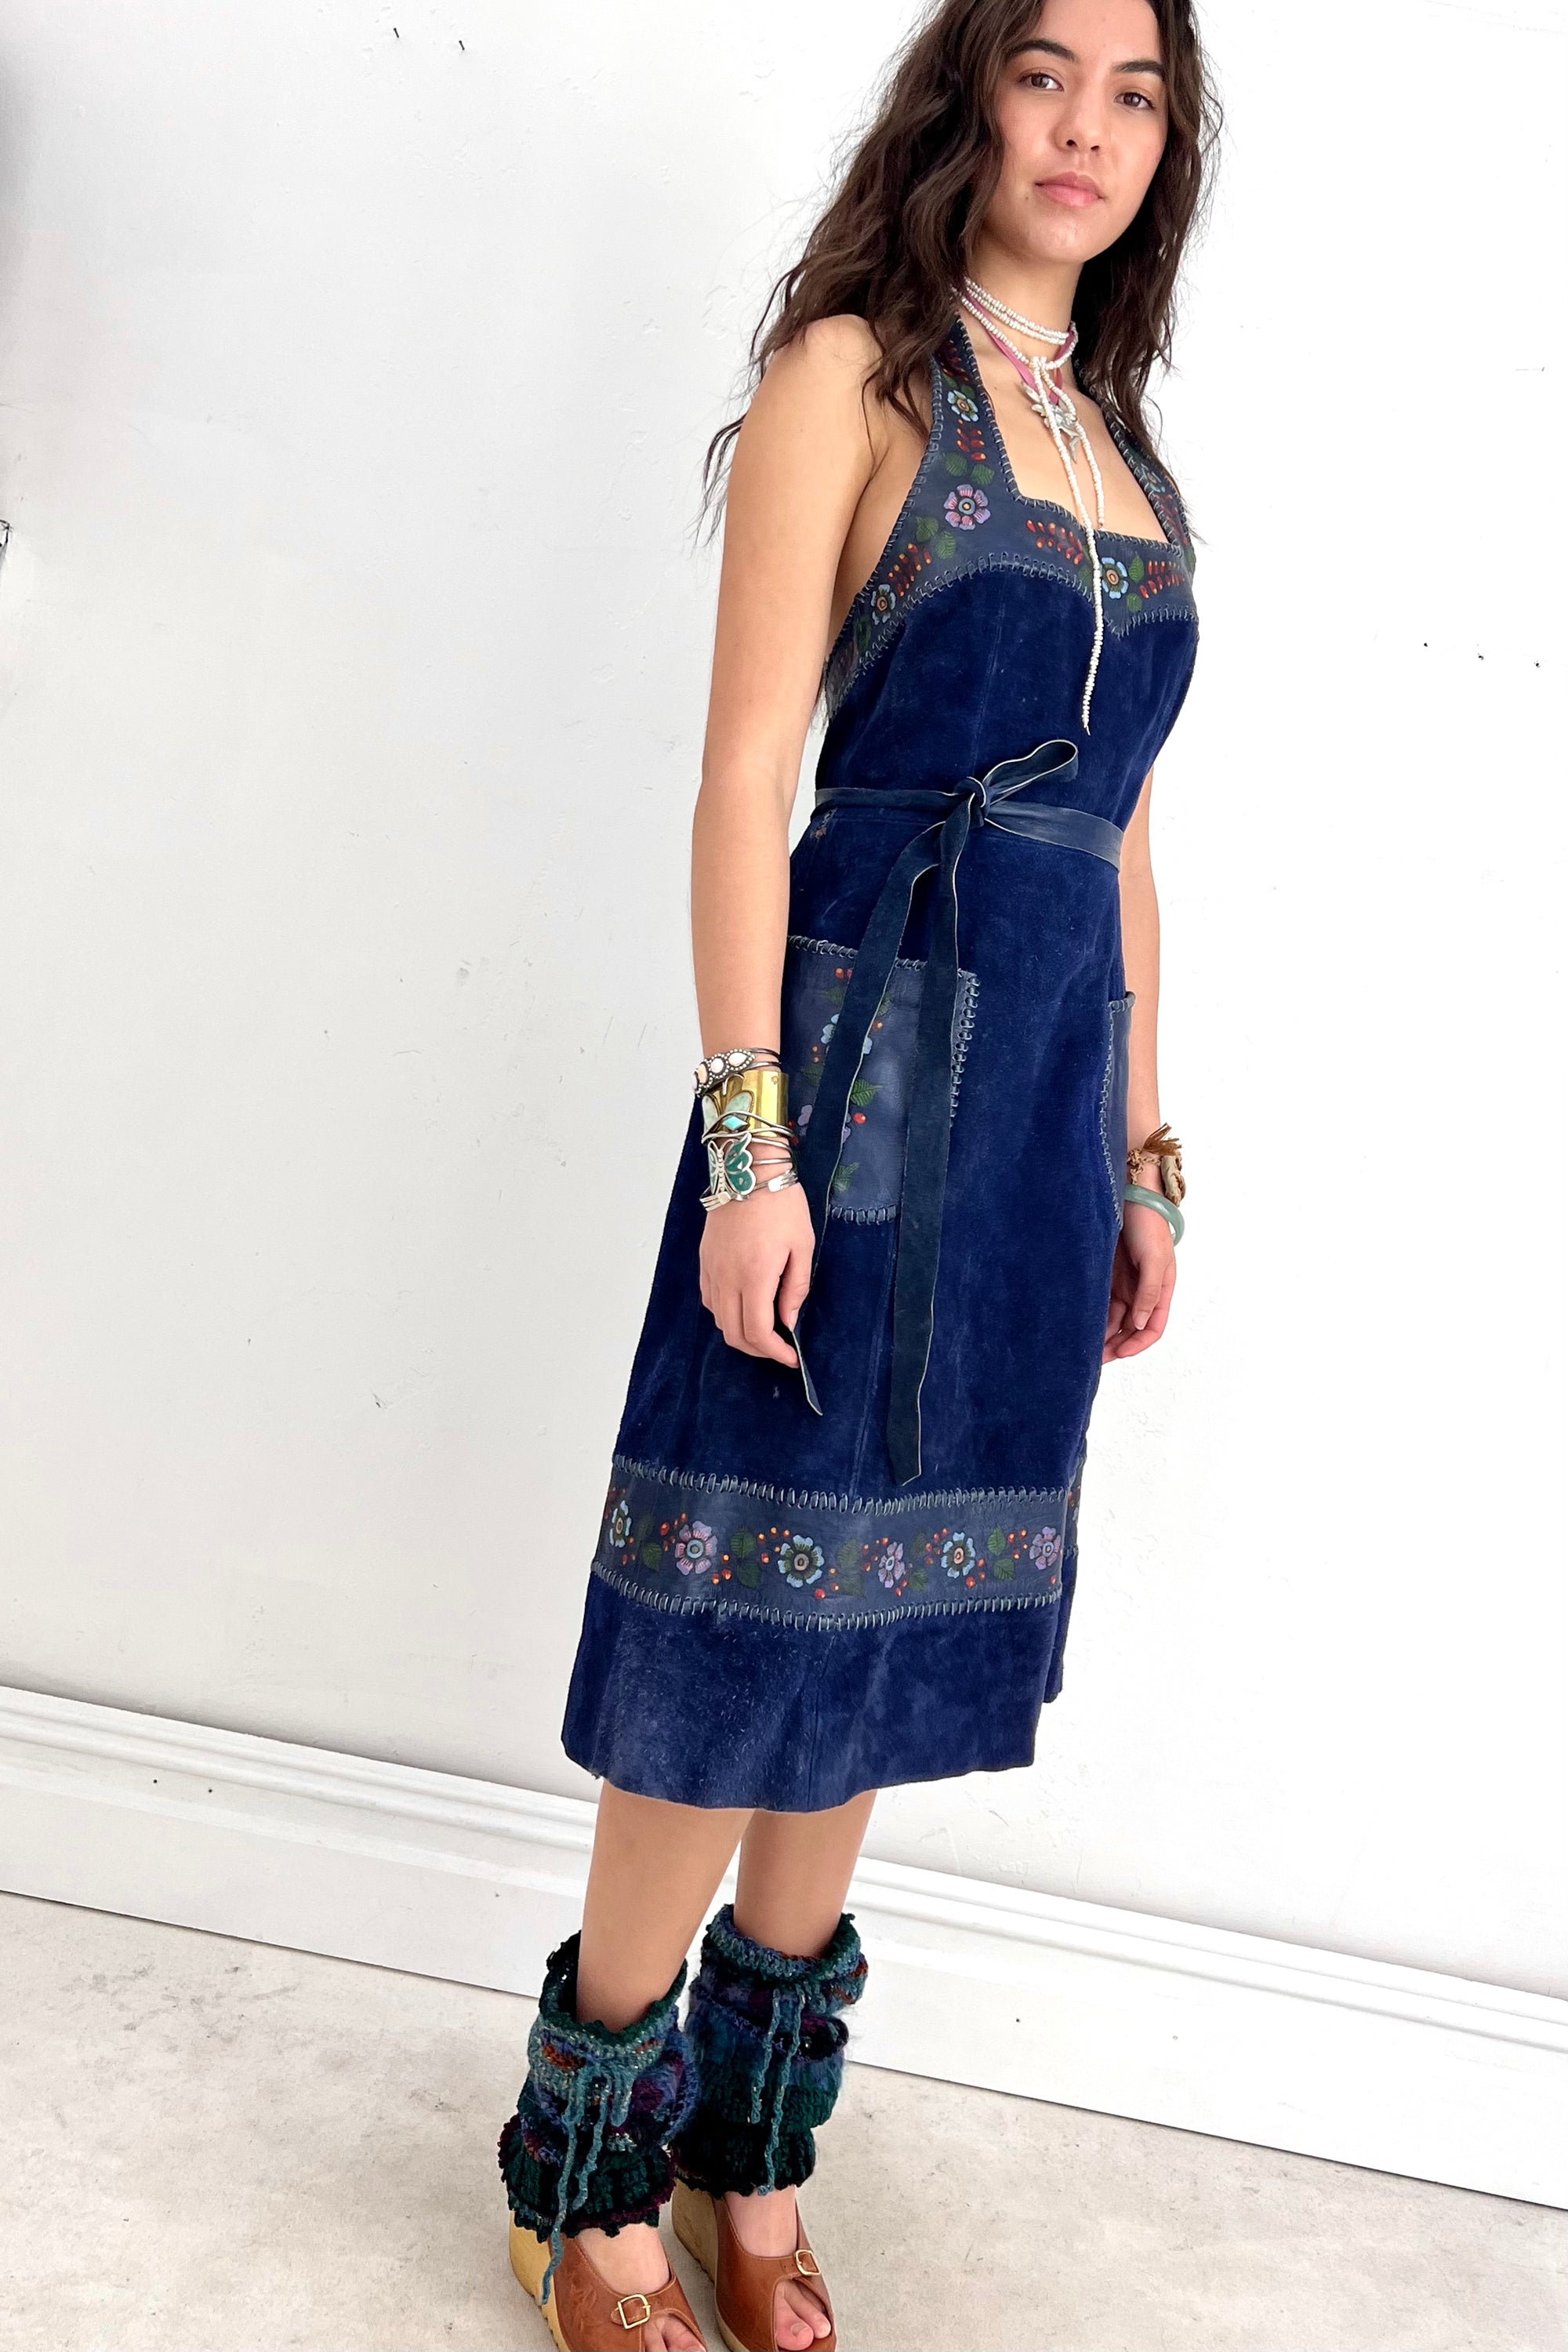 Vintage Char Leather Wrap Dress Selected by Anna Corinna